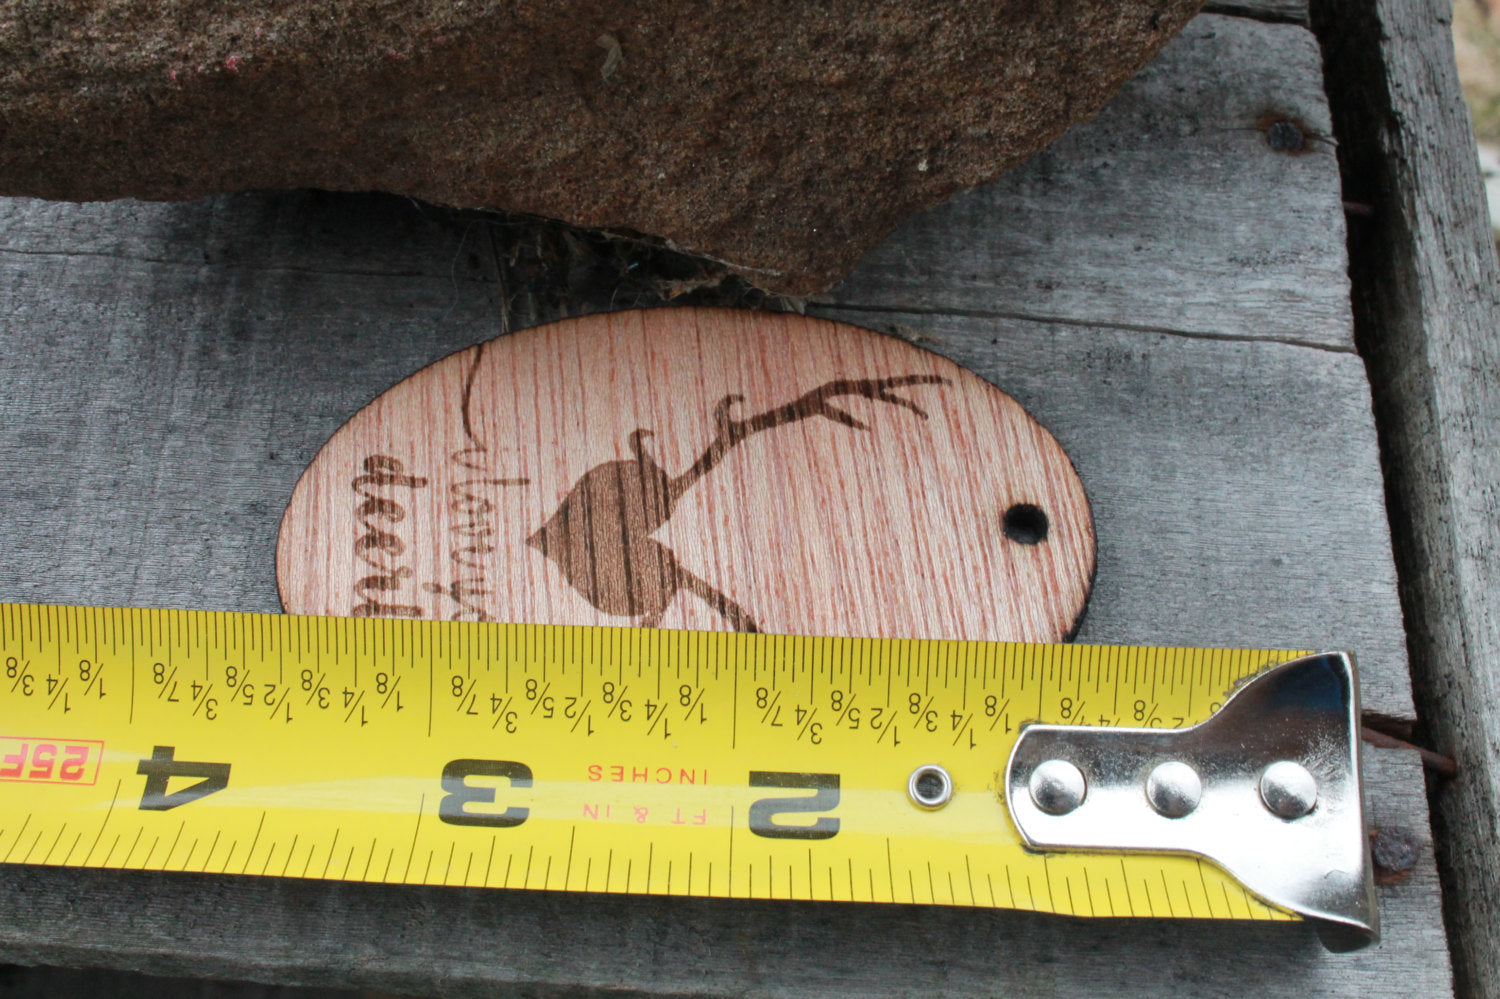 Wooden 3 1/2 ' Measuring Tape with Key Chain